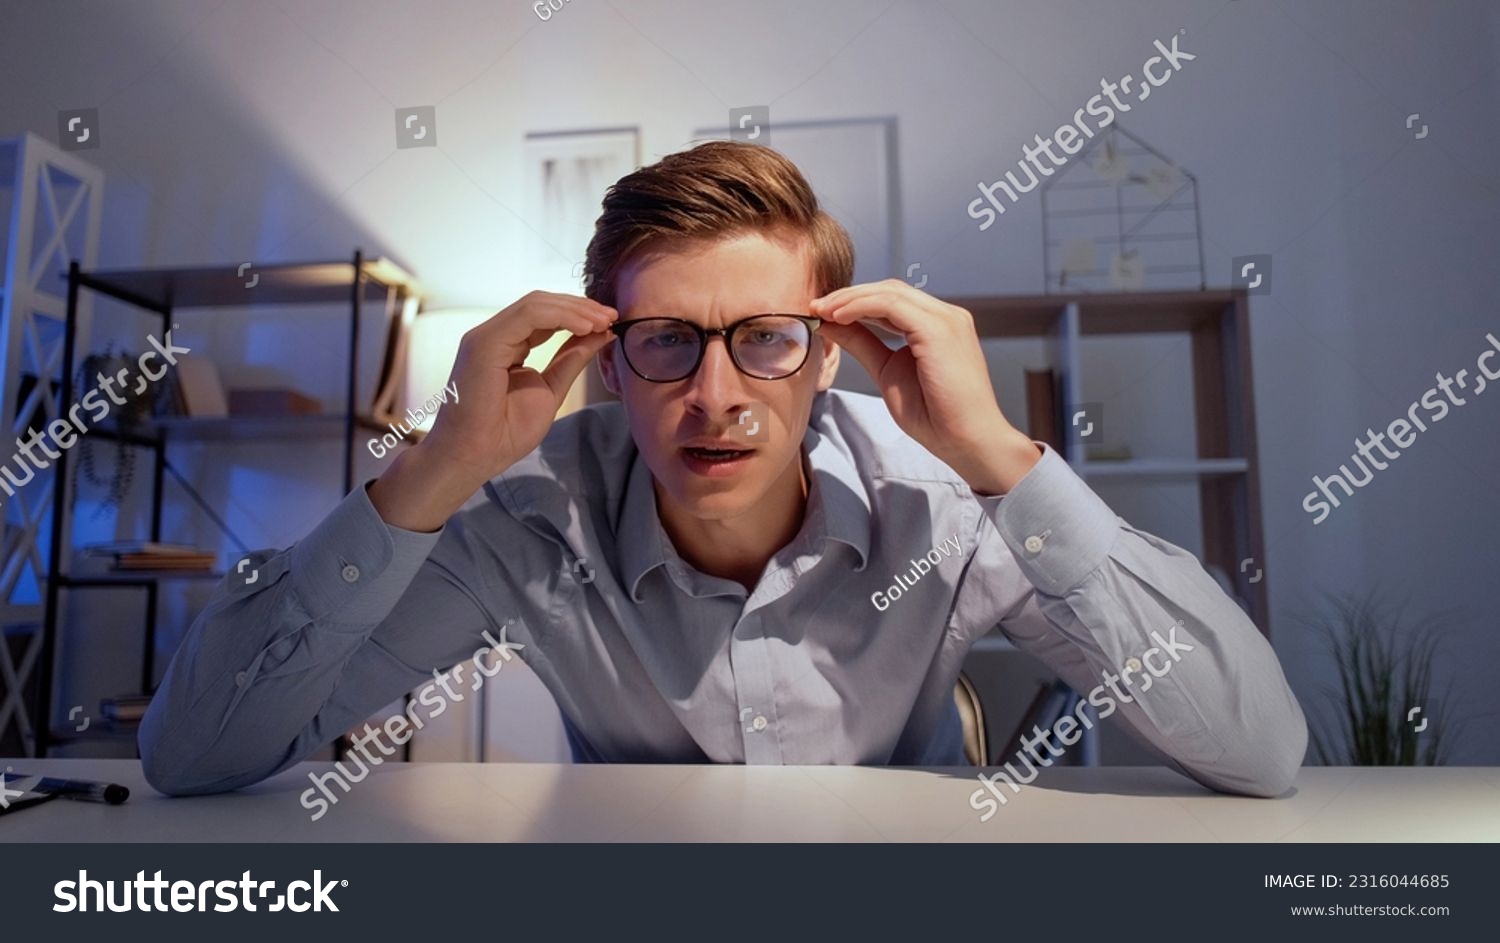 Shocked man. Online conference. Interesting news. Smart curious guy sitting work desk looking on camera holding glasses in light room interior. #2316044685